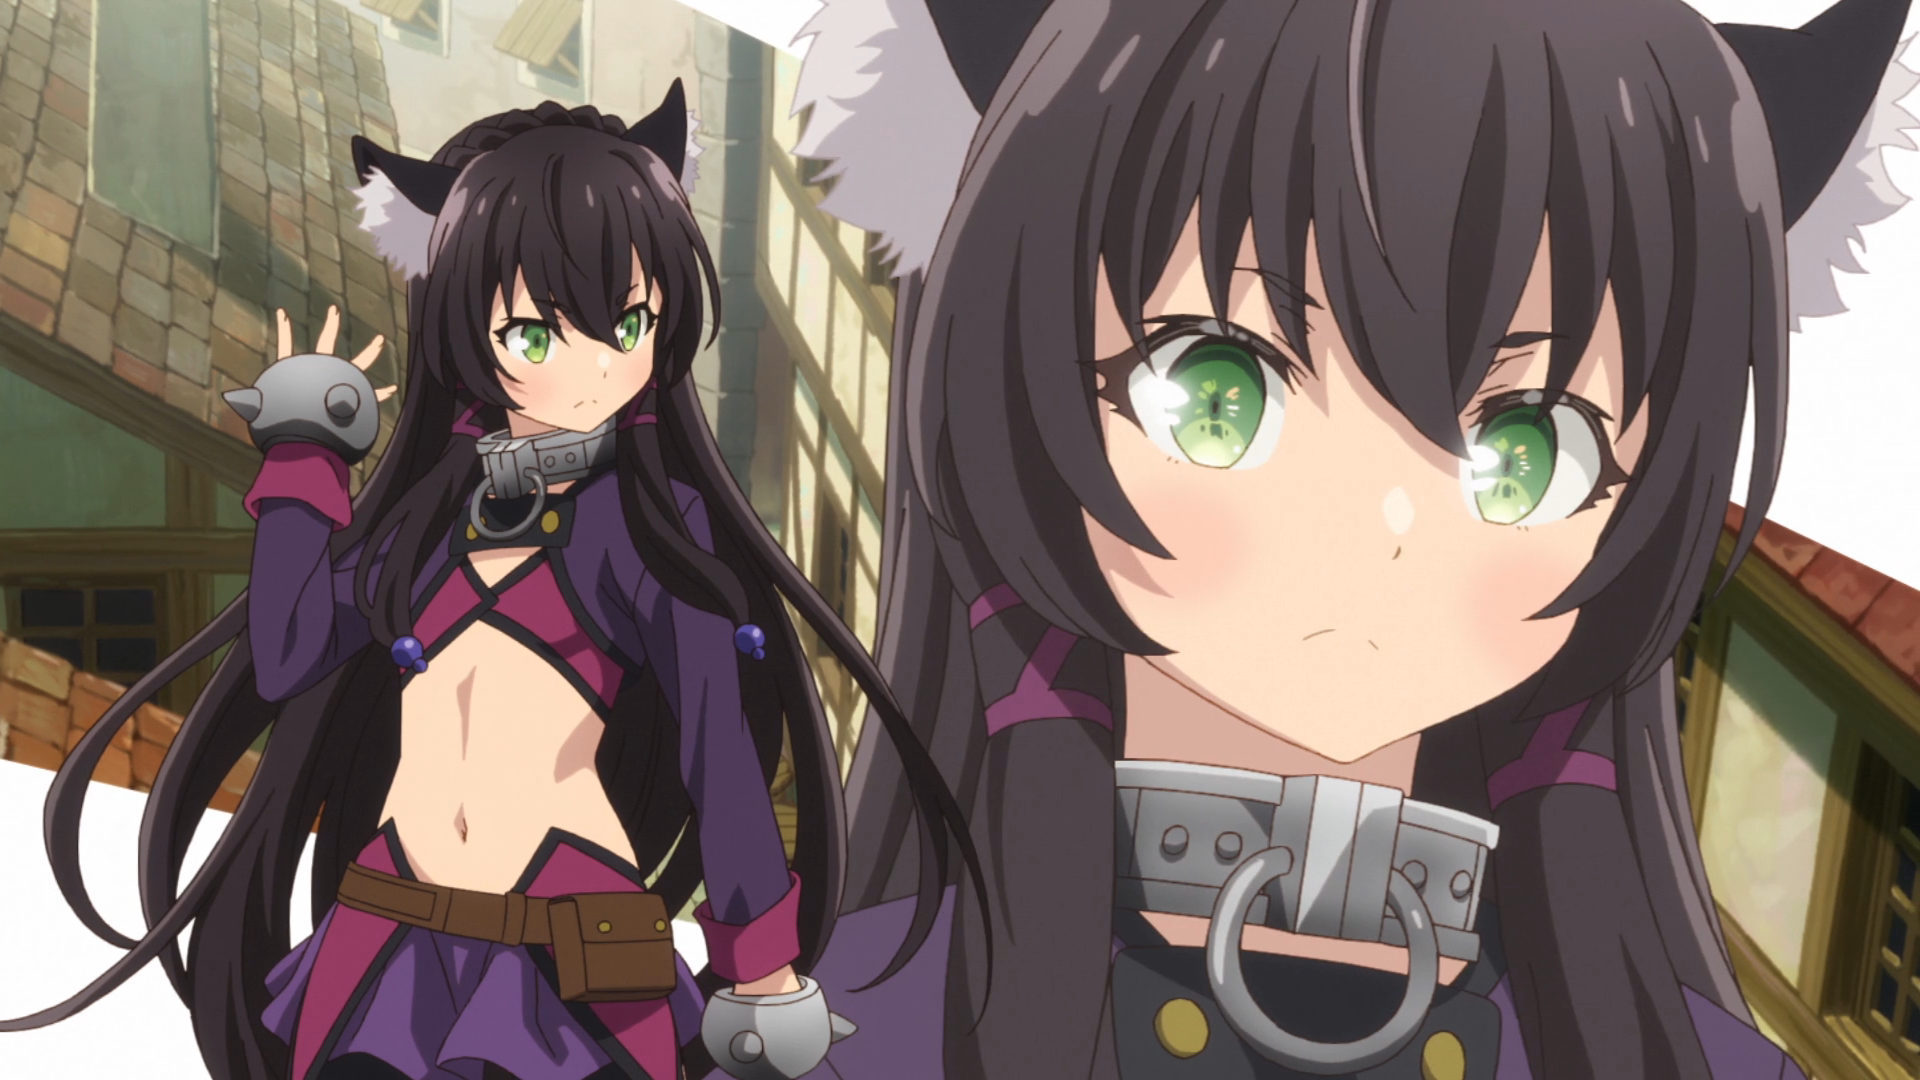 How Not To Summon A Demon Lord Wallpapers